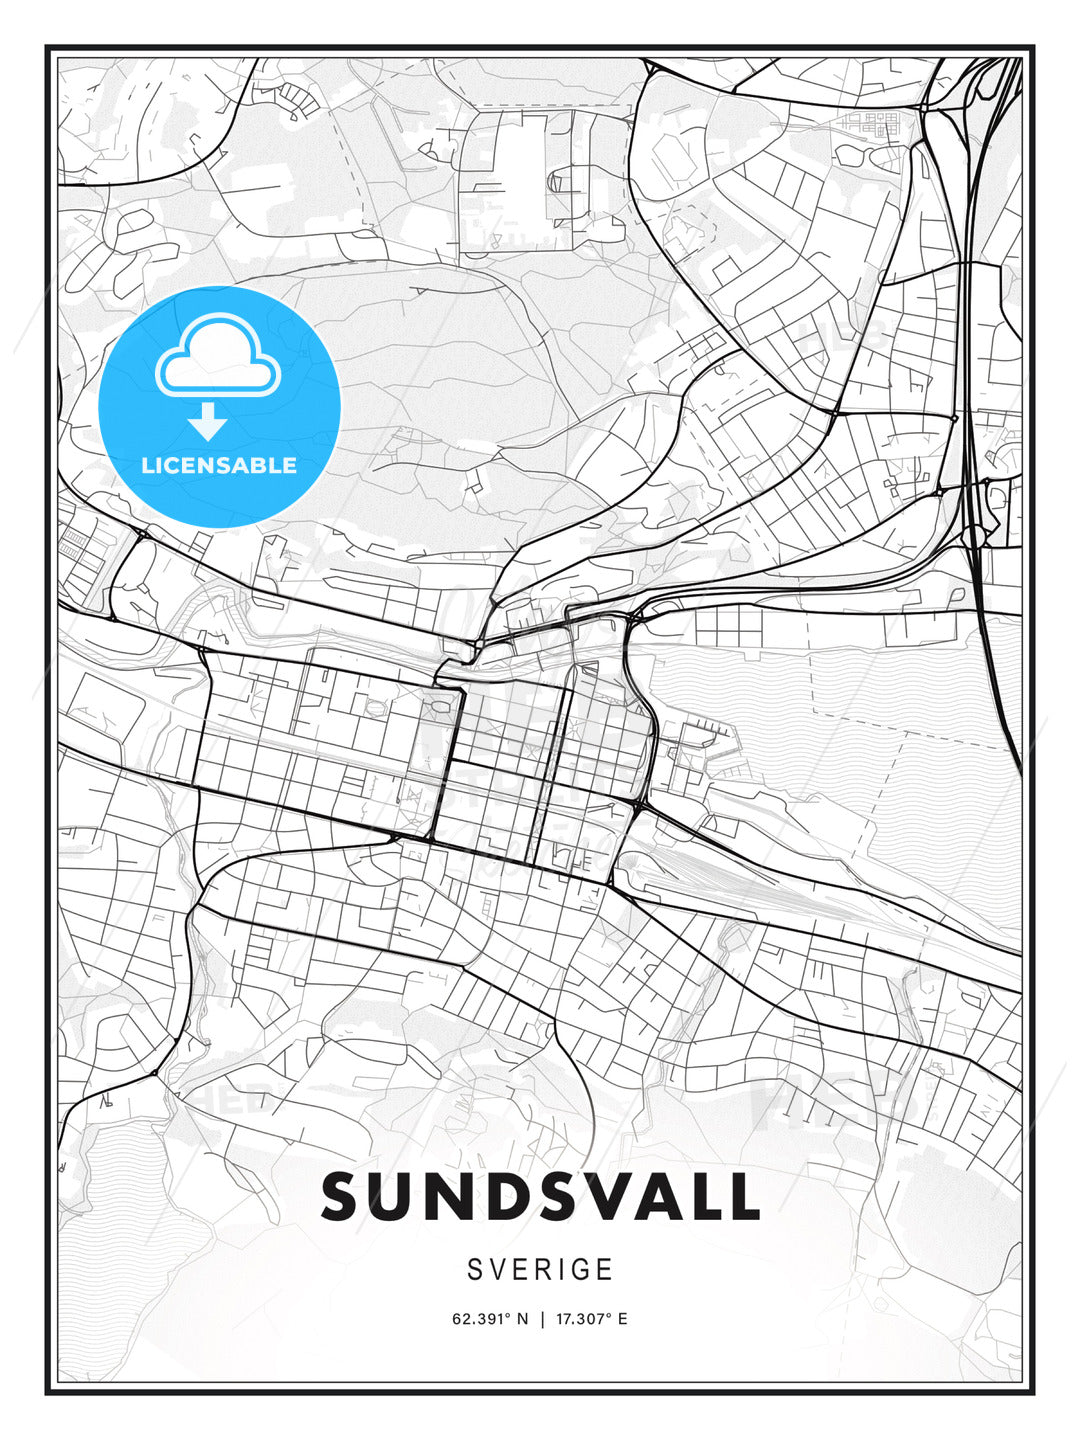 Sundsvall, Sweden, Modern Print Template in Various Formats - HEBSTREITS Sketches